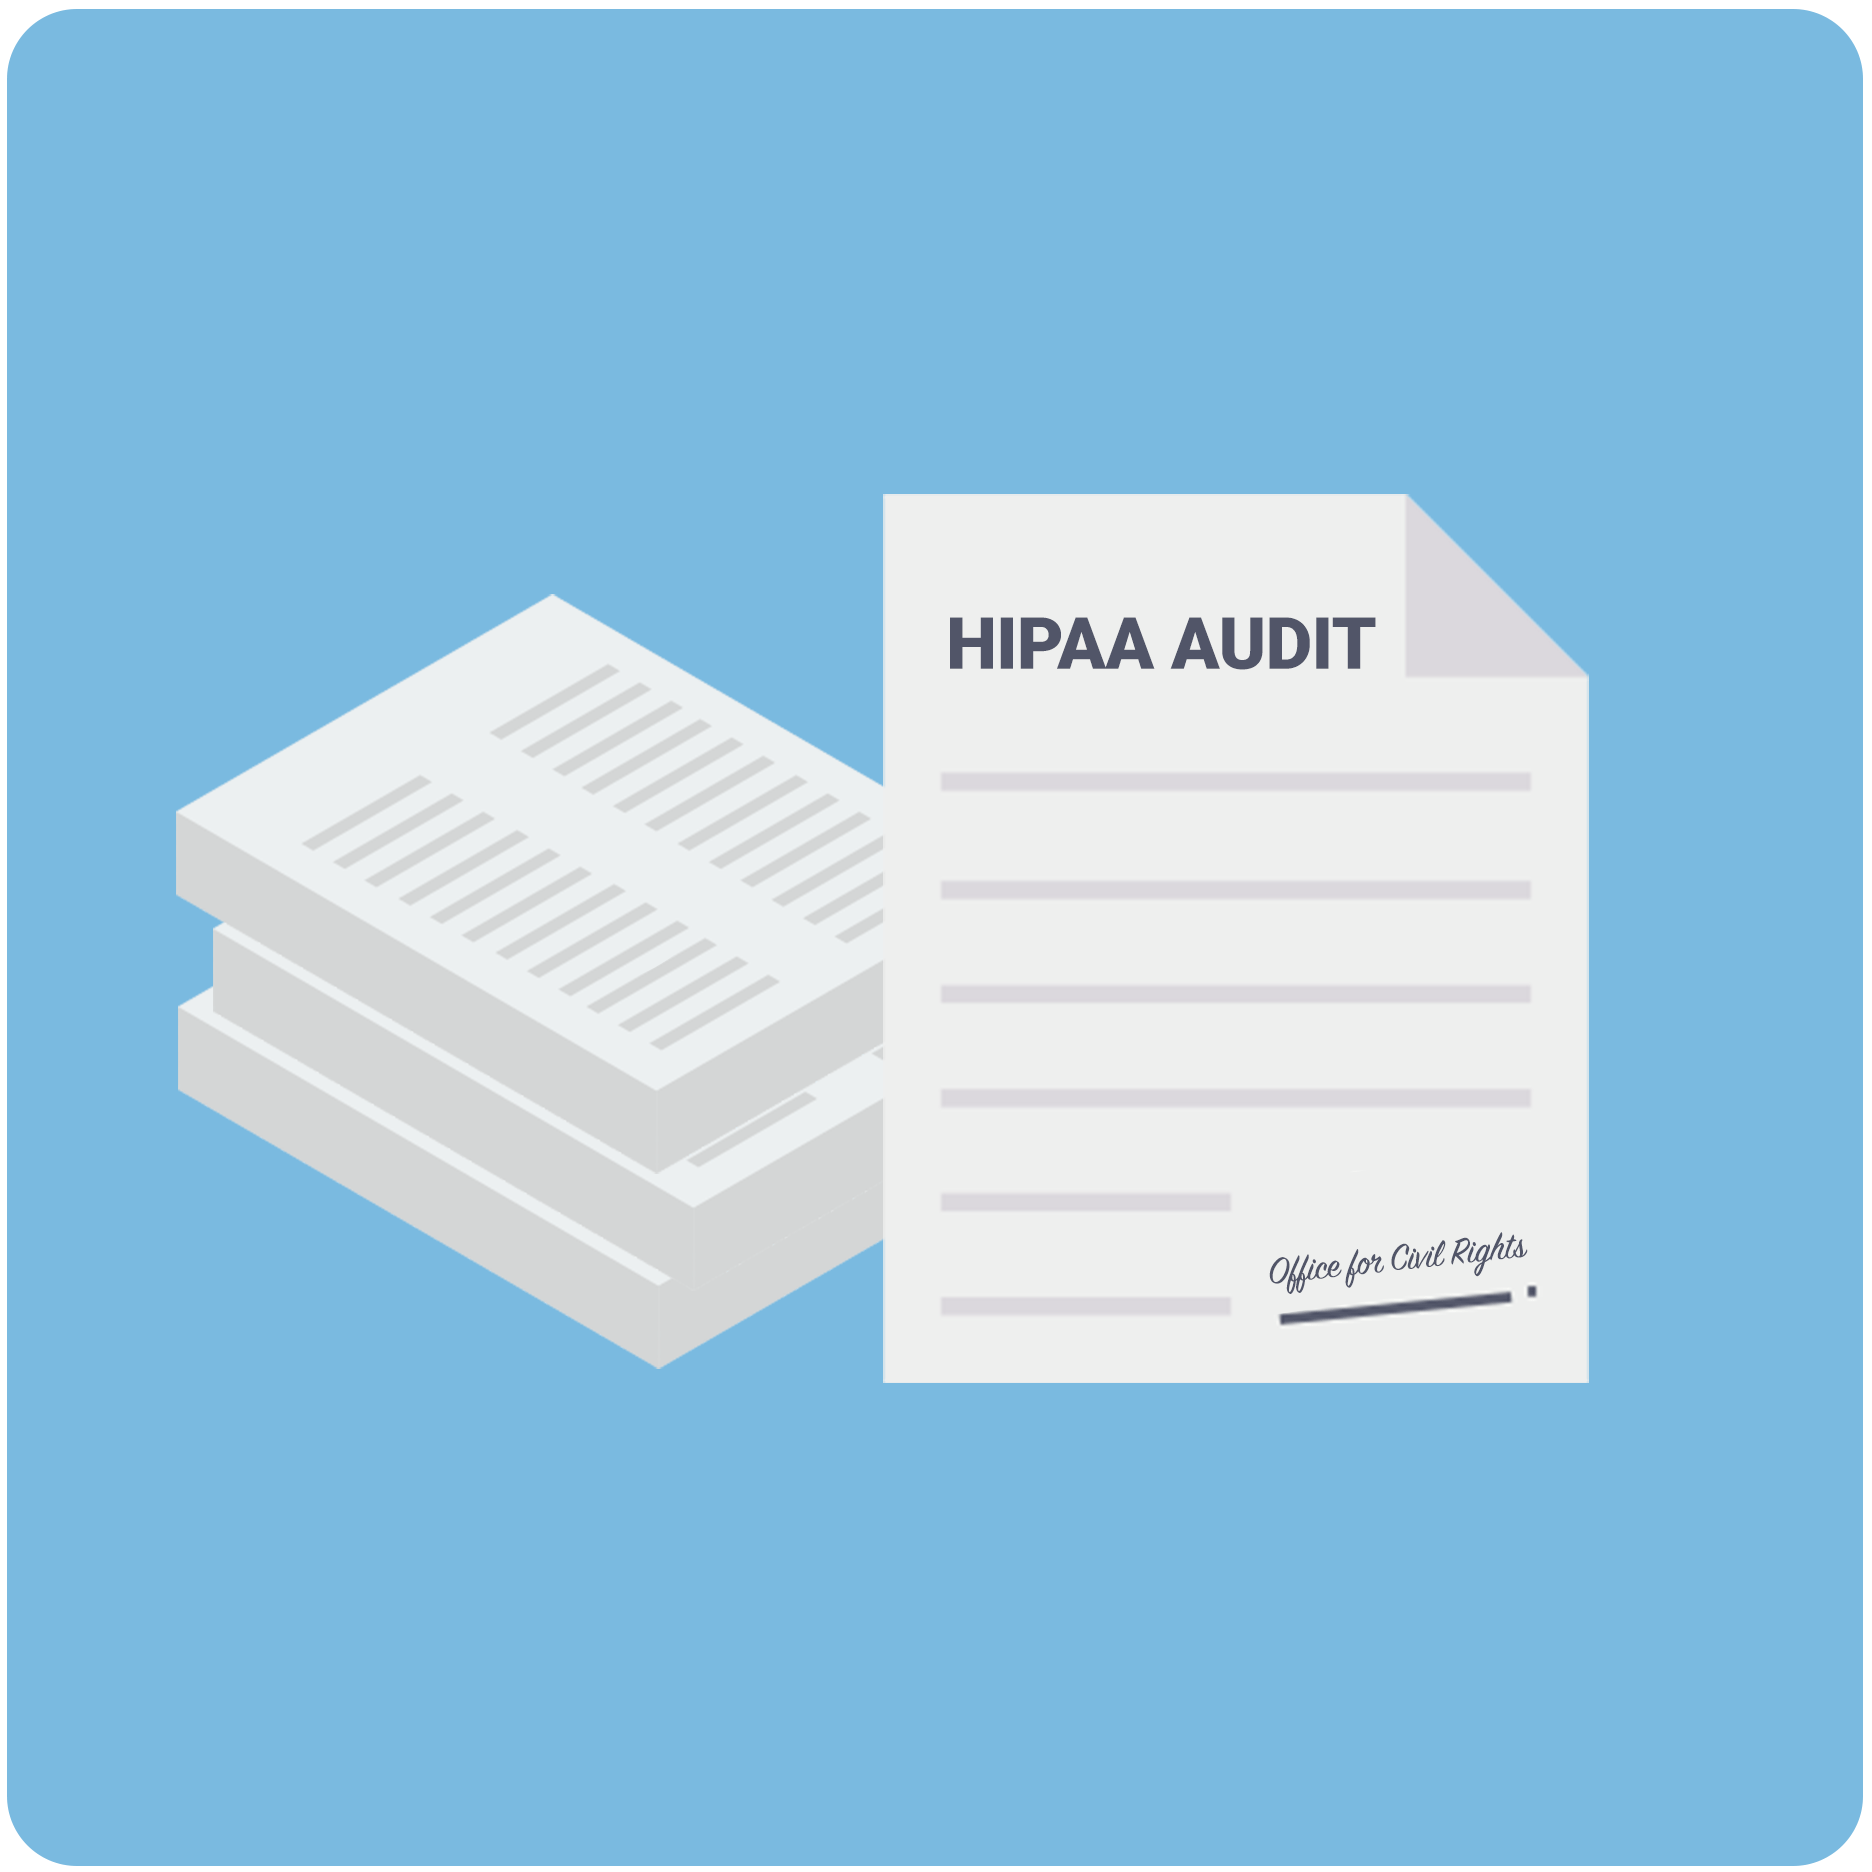 Top 6 Ways to Be Prepared for a HIPAA Audit